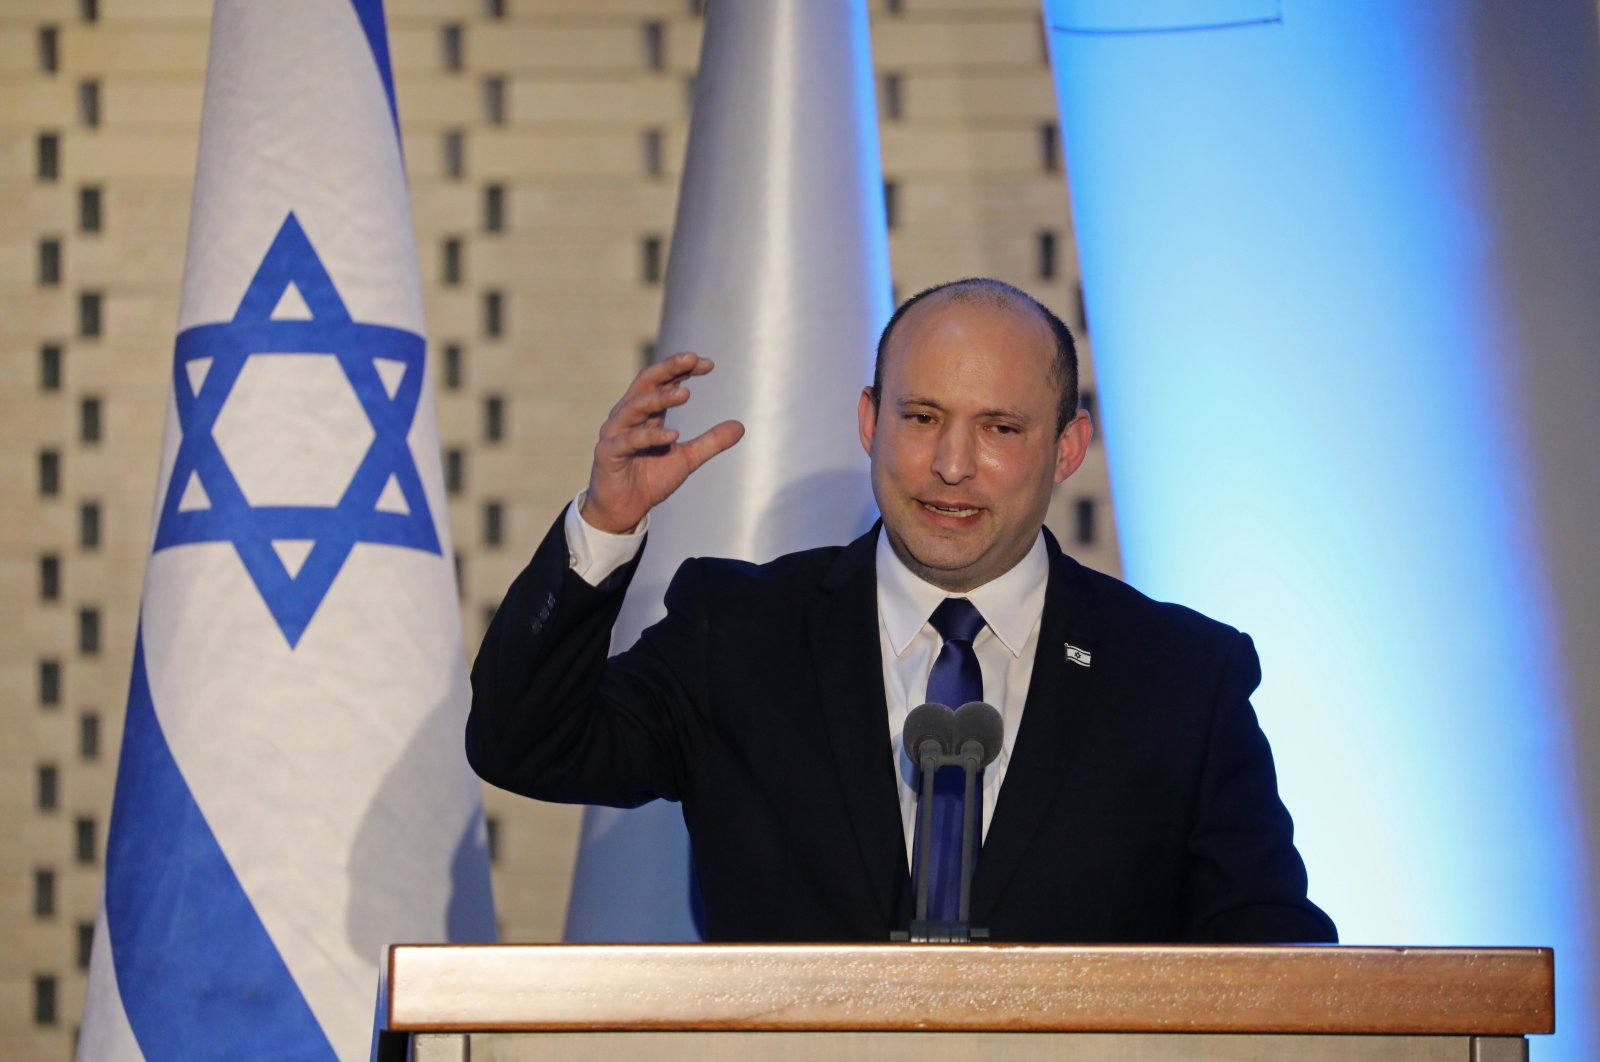 Israeli Prime Minister Naftali Bennett speaks during a memorial ceremony in the Hall of Remembrance at Mount Herzl Military Cemetery in West Jerusalem, Israel, June 20, 2021. (AP Photo)